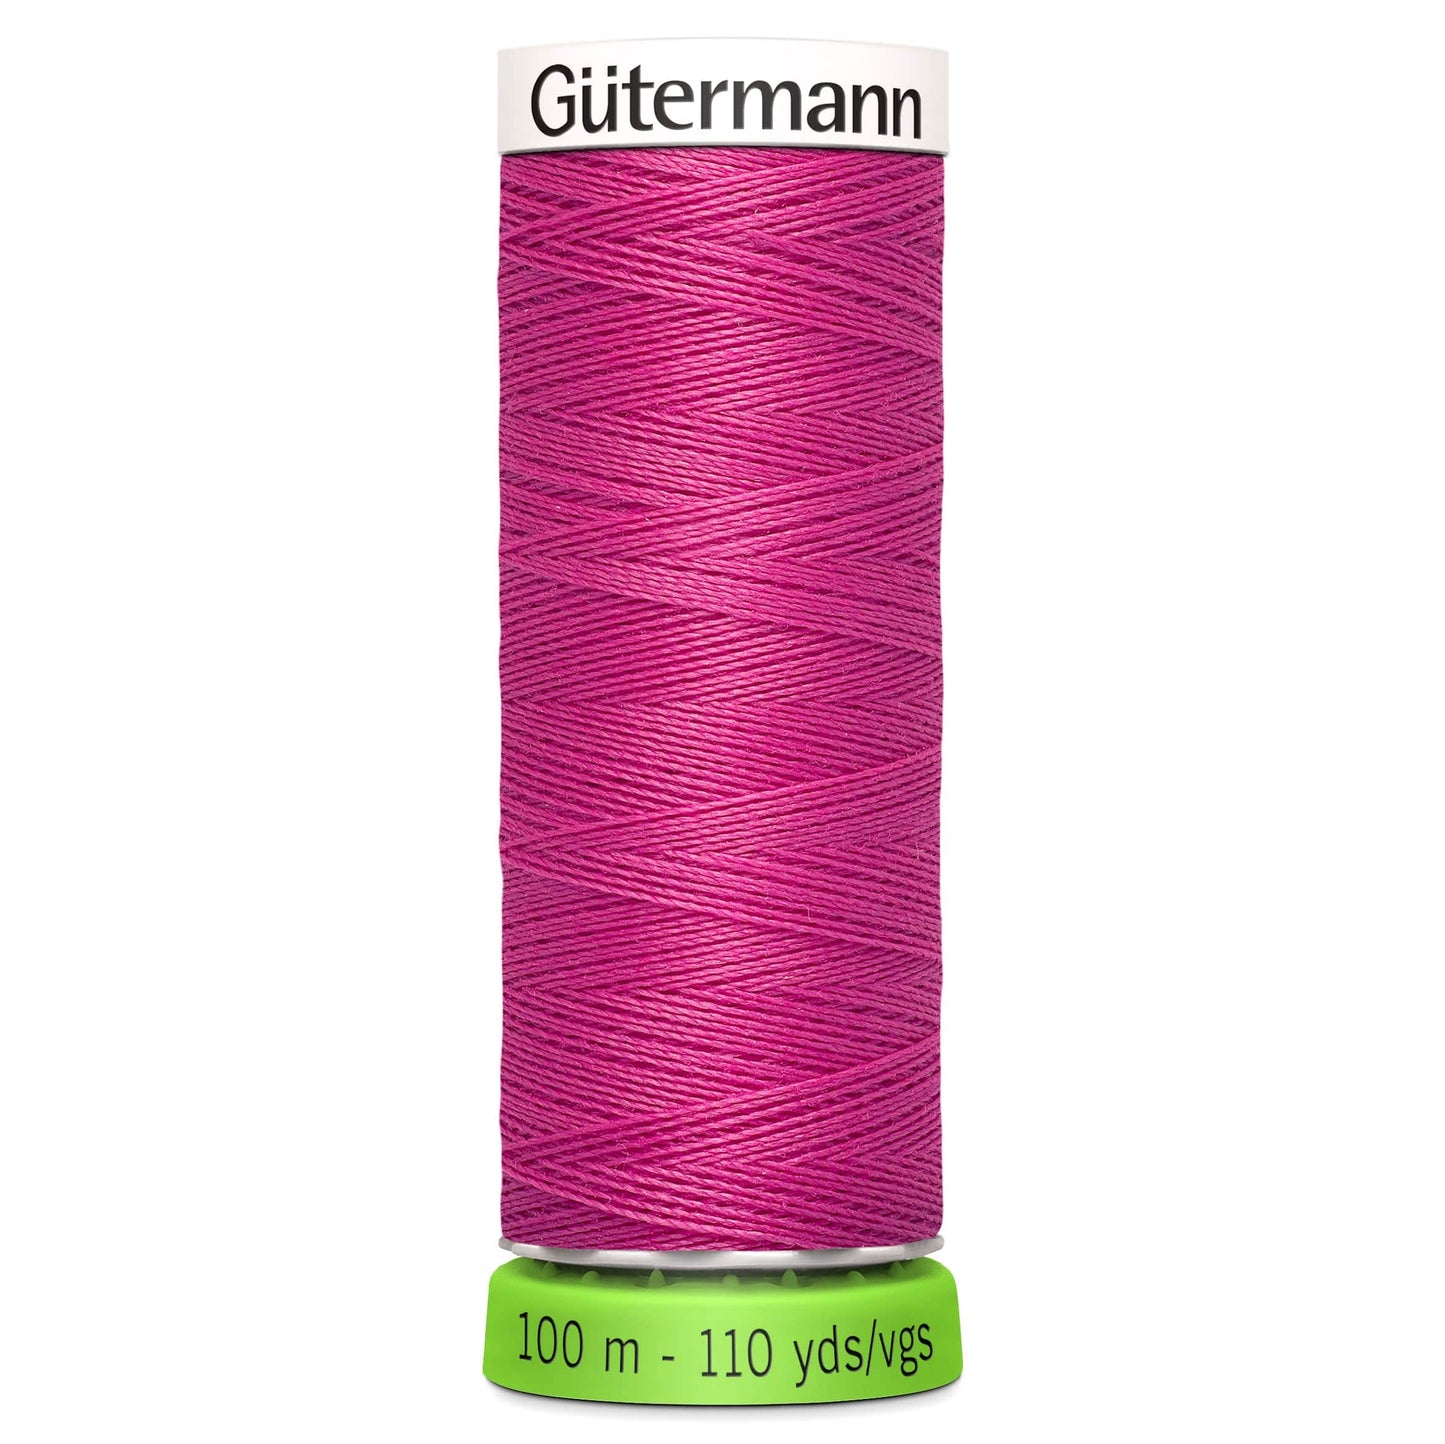 100 m Reel Gütermann Recycled Sew-All Thread in Hot Pink, no. 733